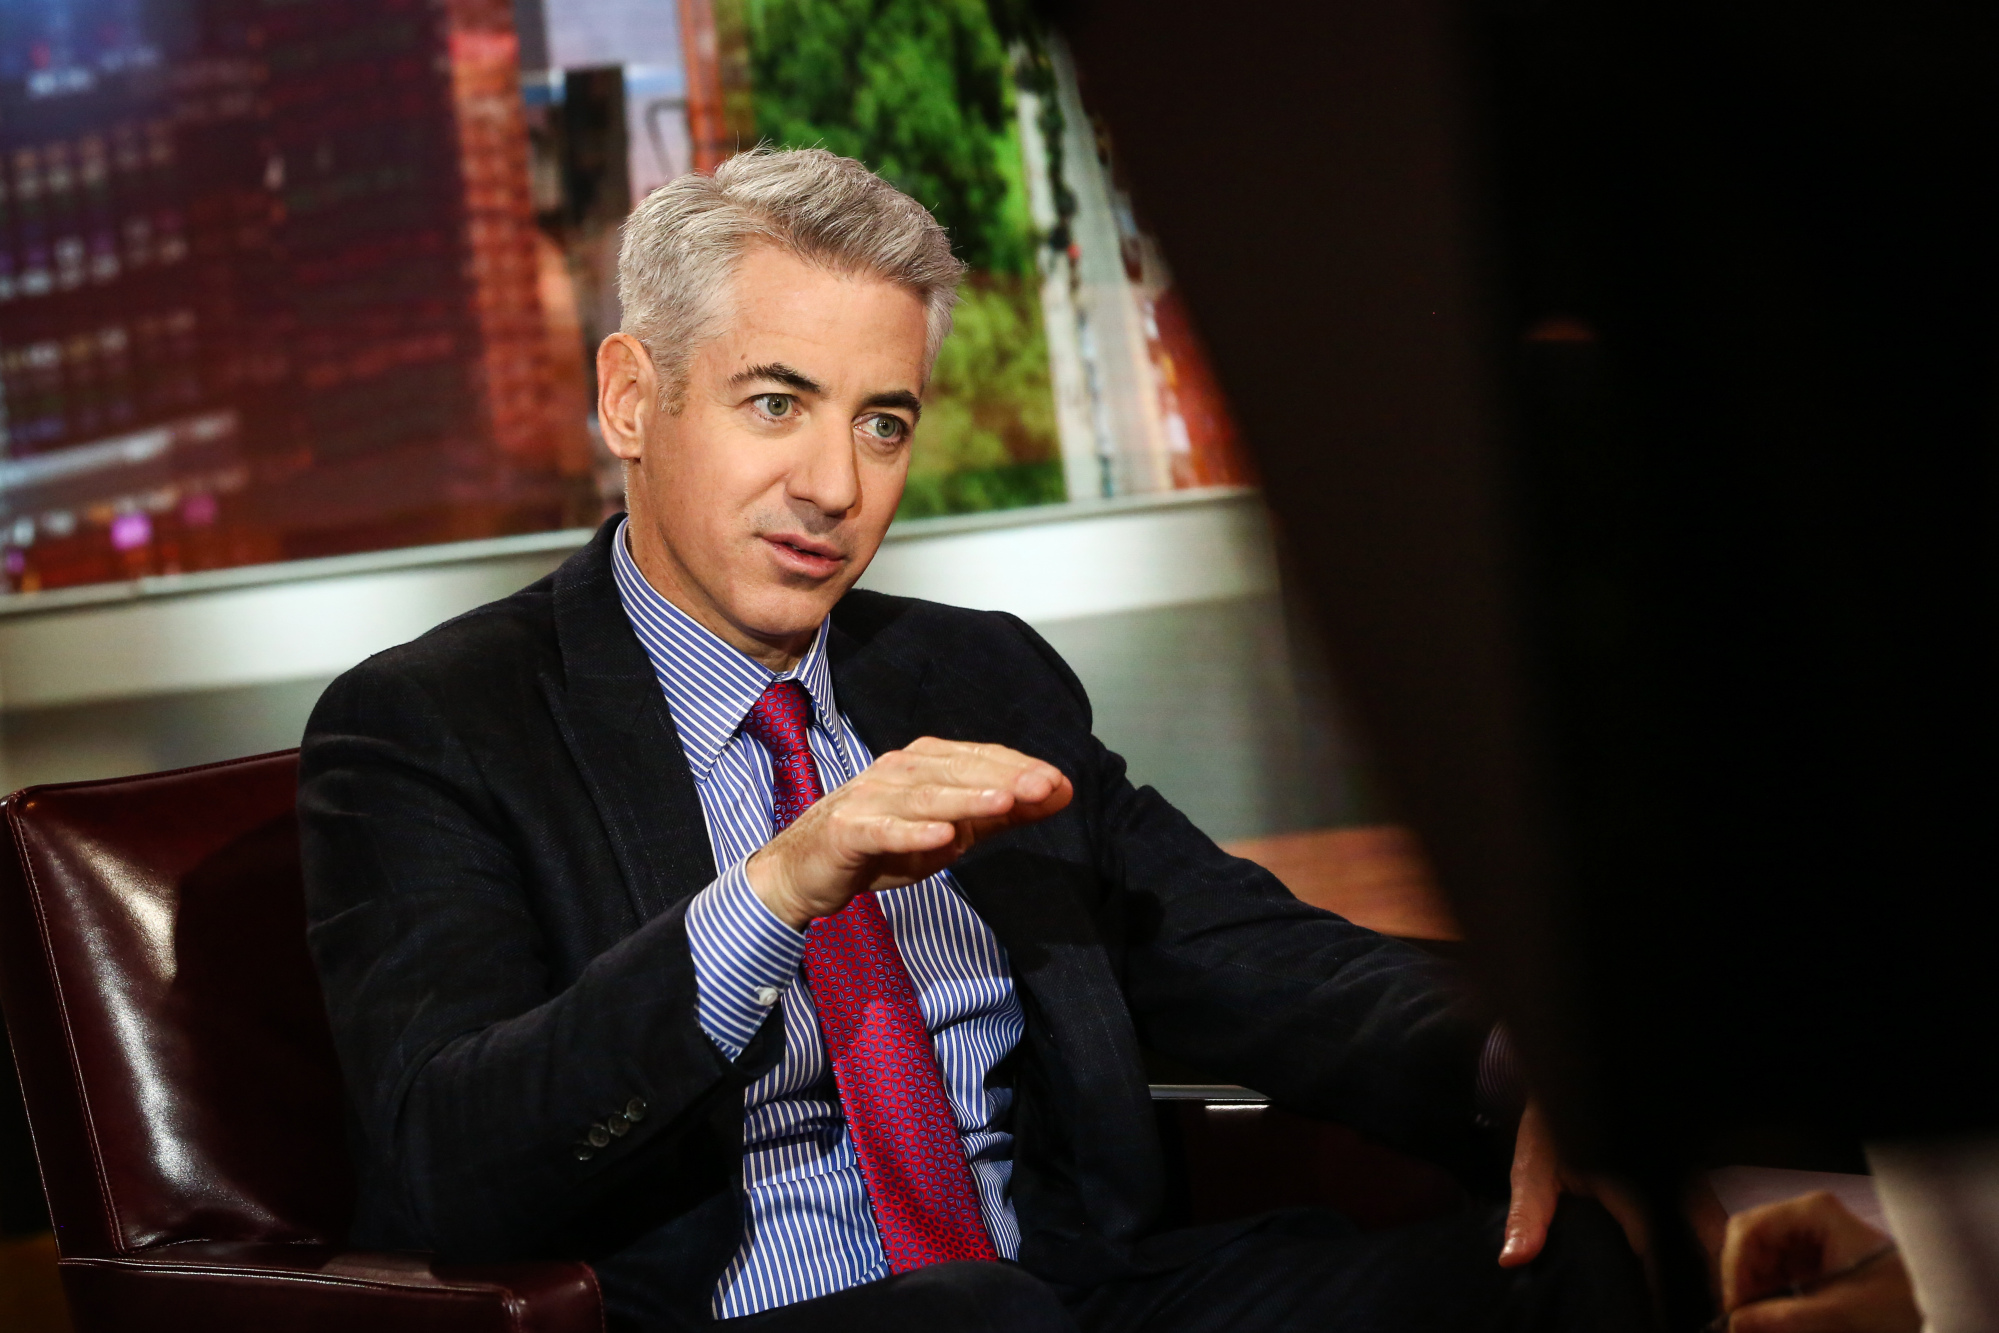 Hd Teem Sket Sex Video Tube - Billionaire Bill Ackman Says Visa Should Pay 'Very Large' Amount in Pornhub  Case - Bloomberg